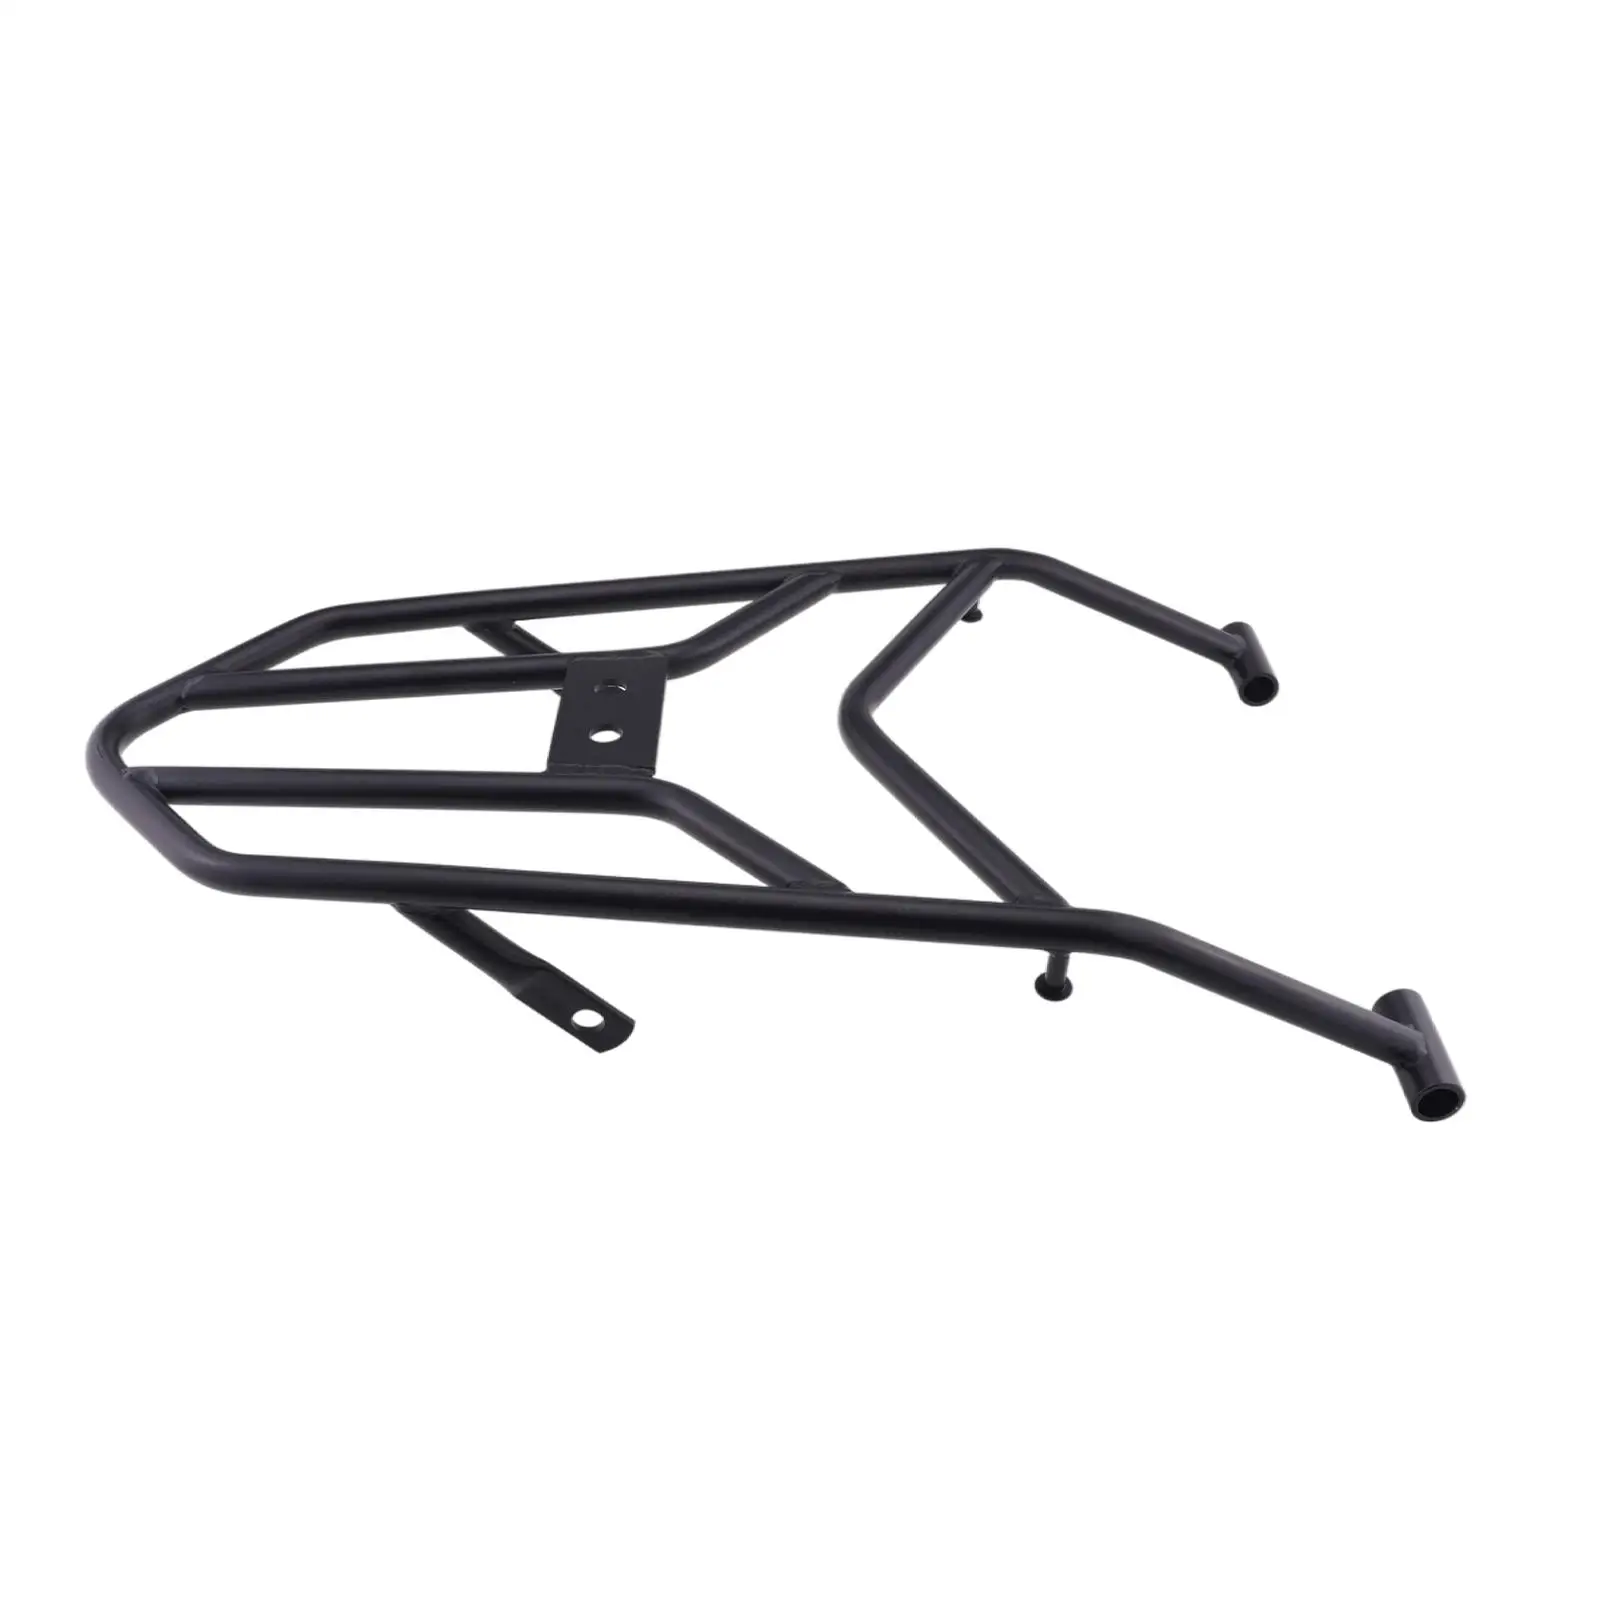 Motorcycle Rear Tail Rack Motorcycle Parts Fit for Honda Crf250L Crf300L